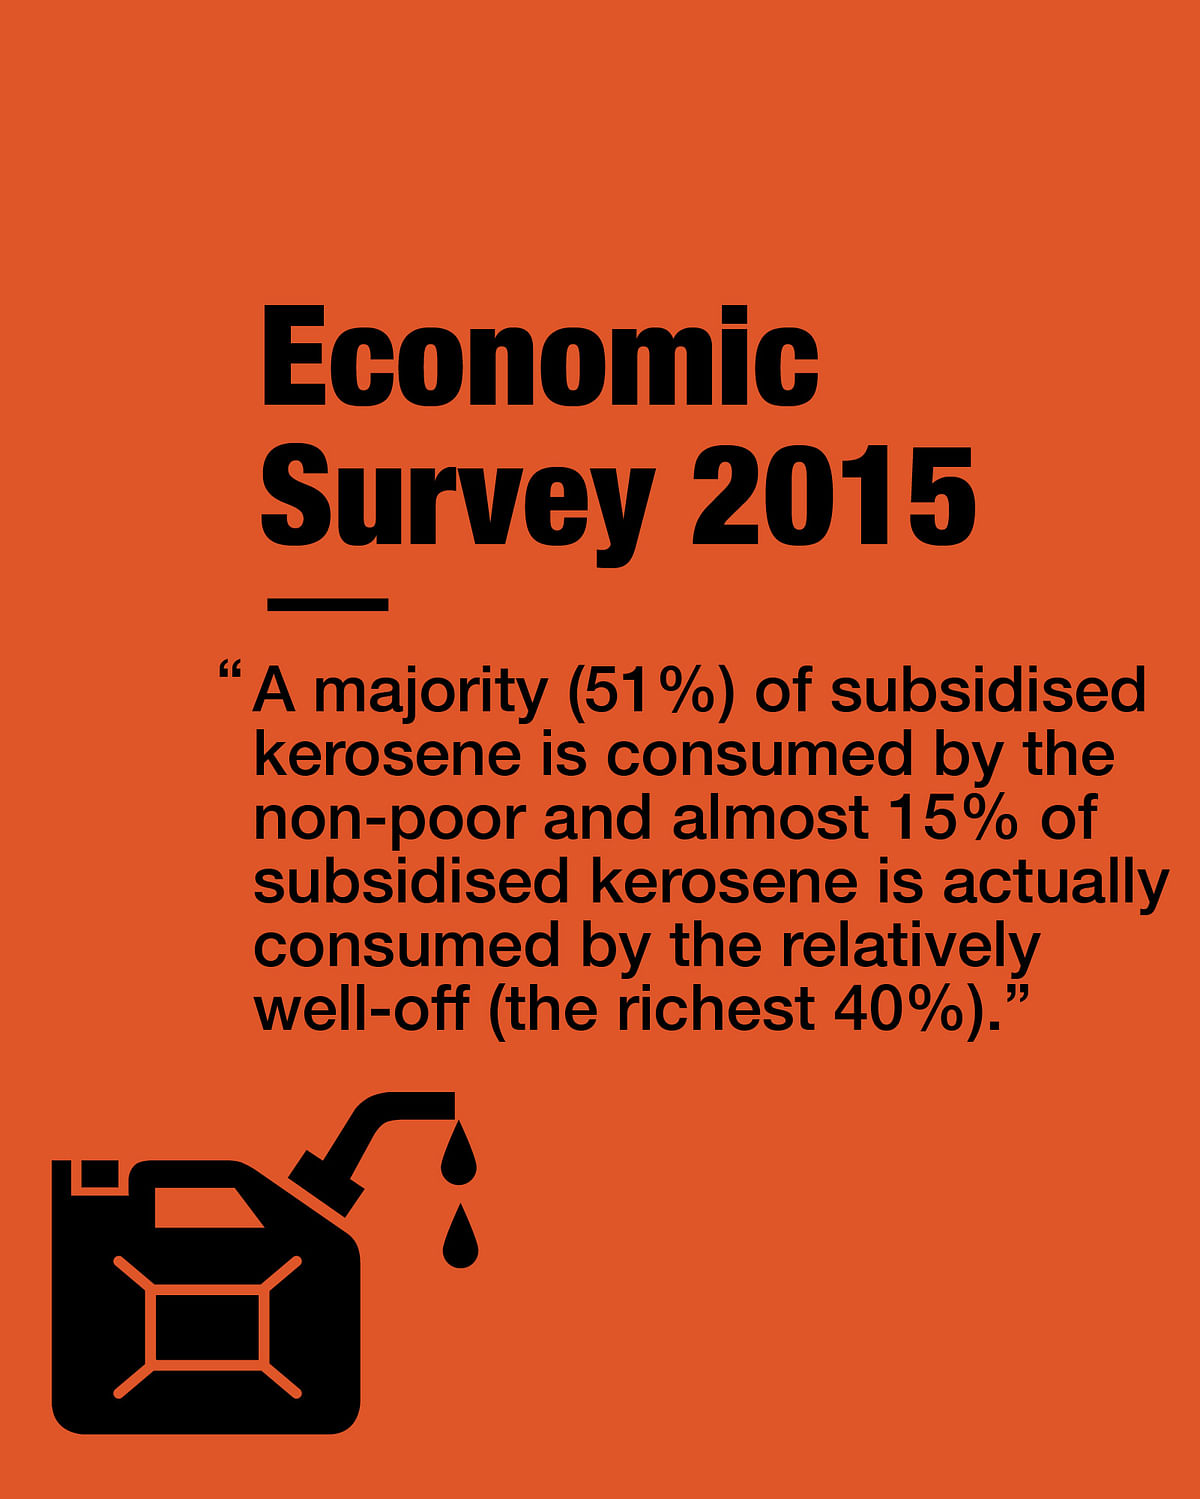 The Economic Survey 2014-15 found that “a rich household benefits more from the subsidy than a poor household.”